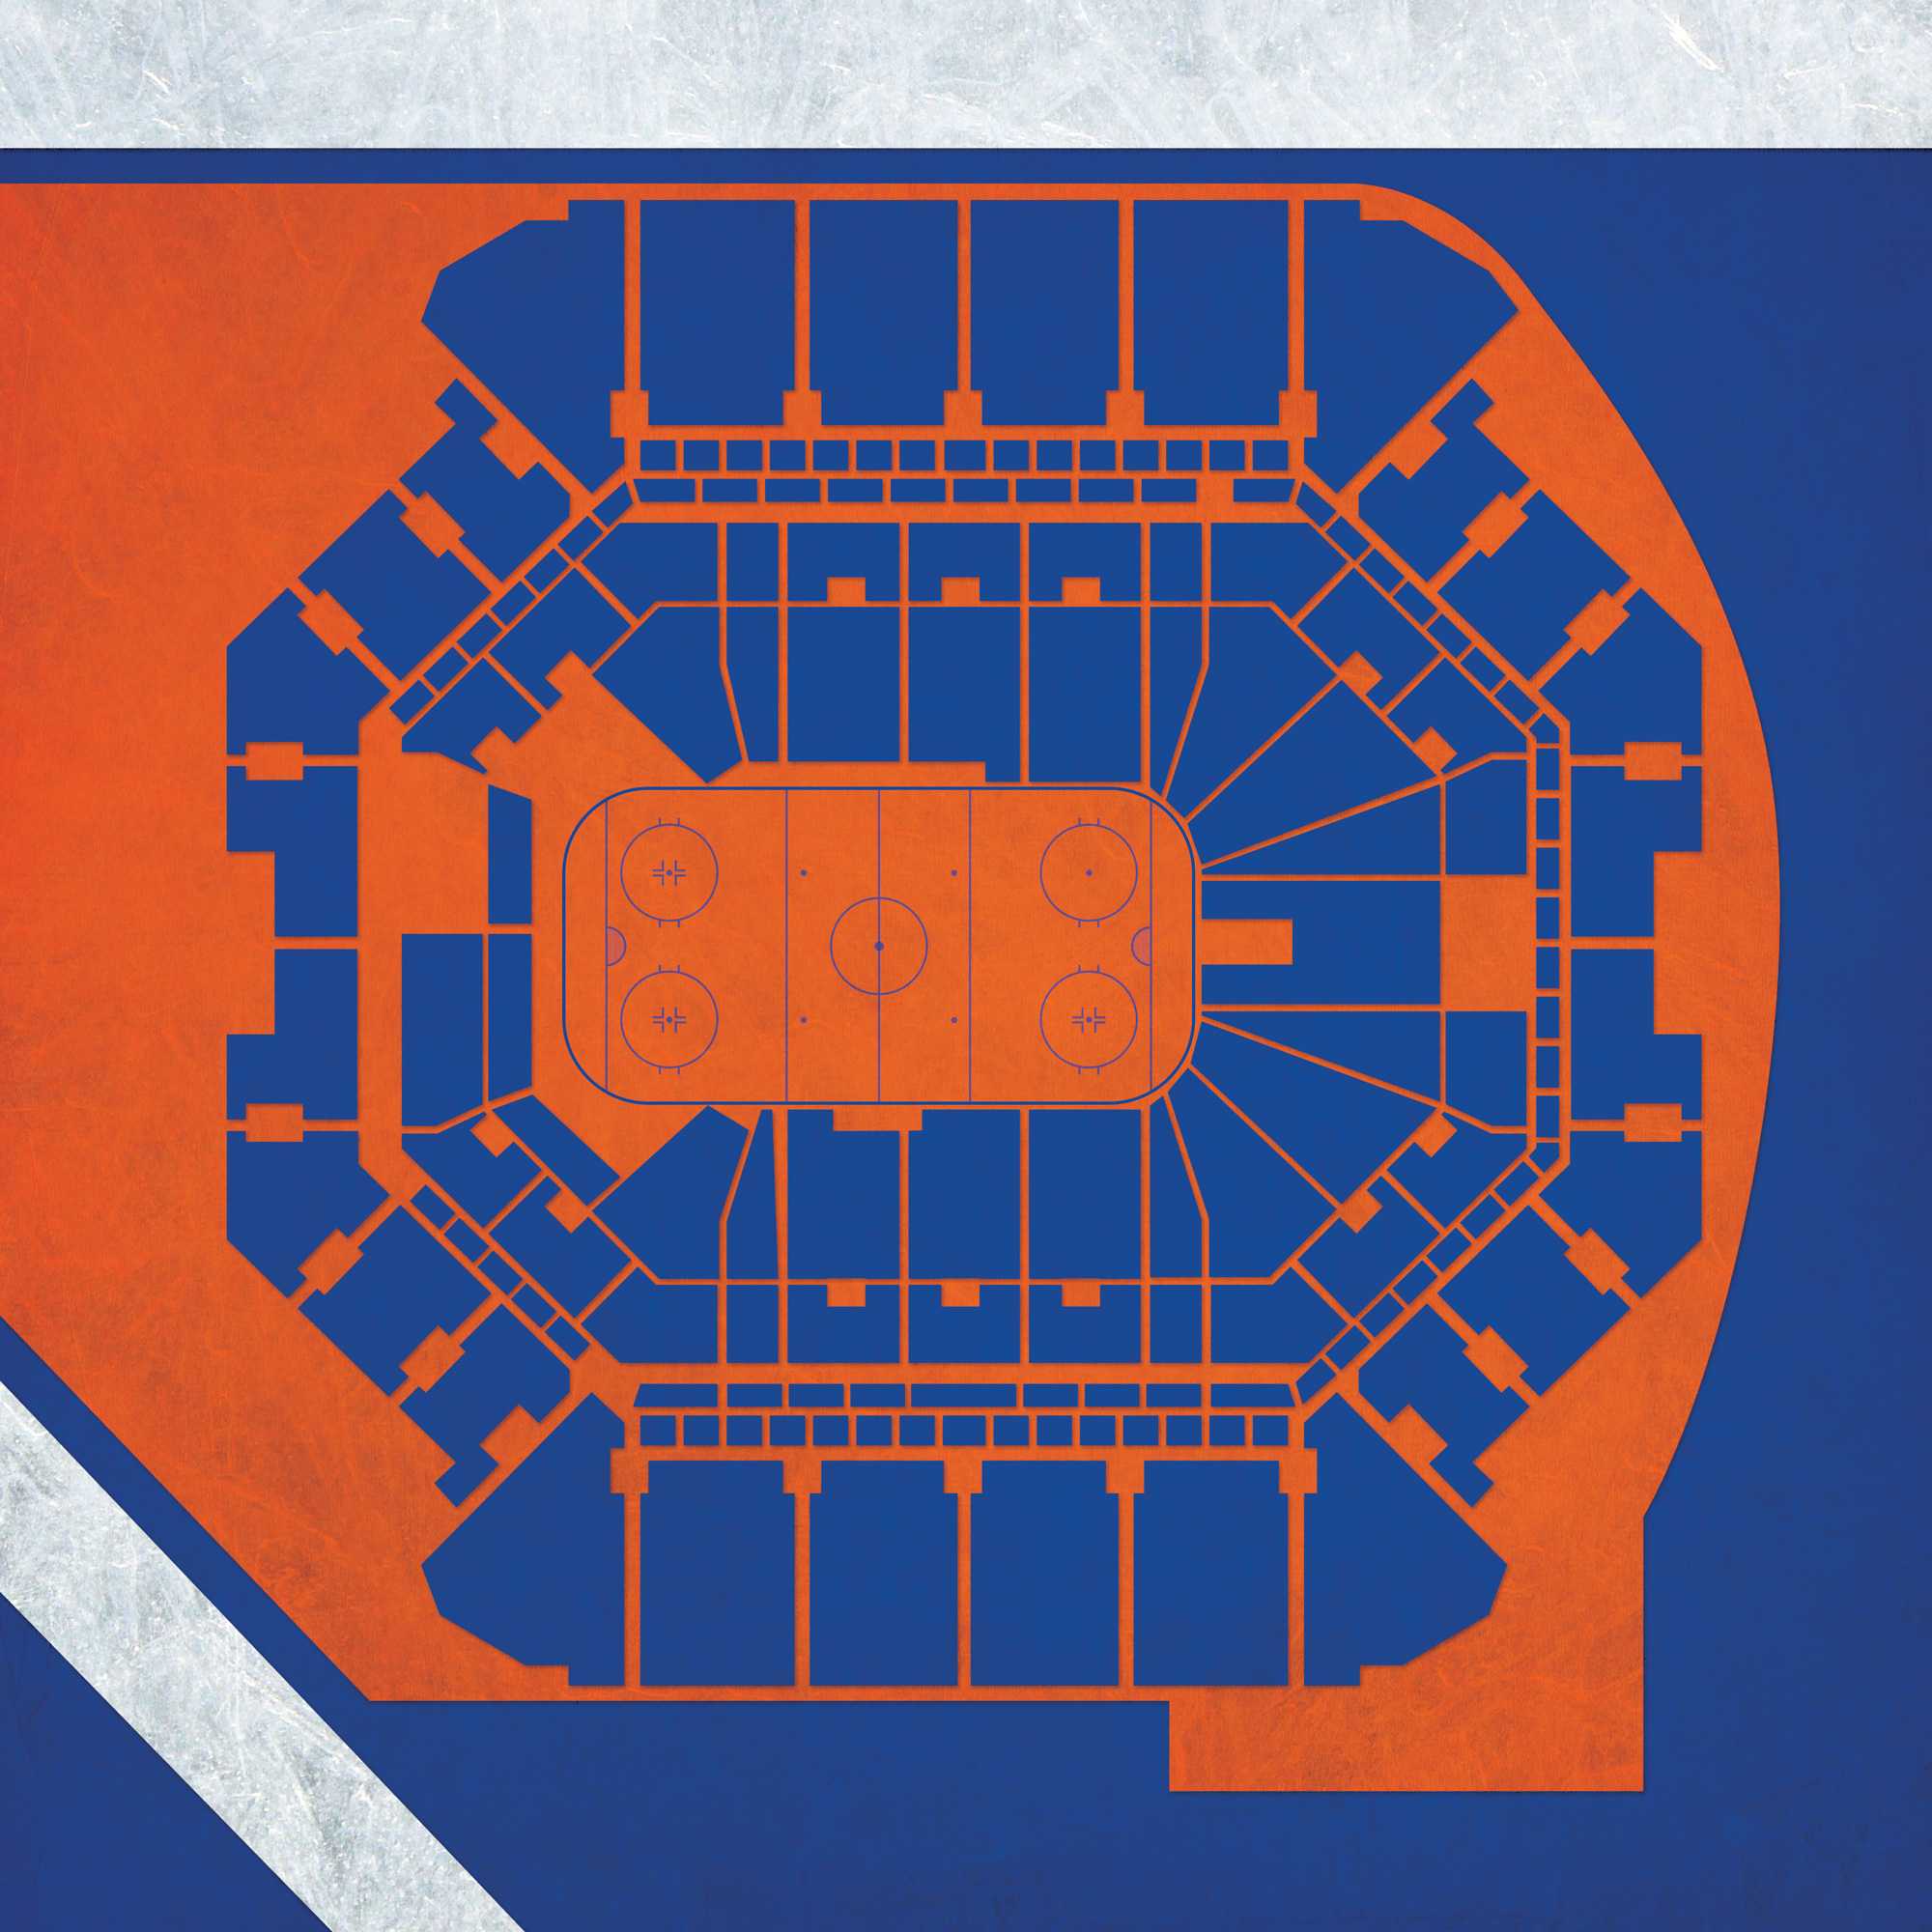 seating chart barclays center